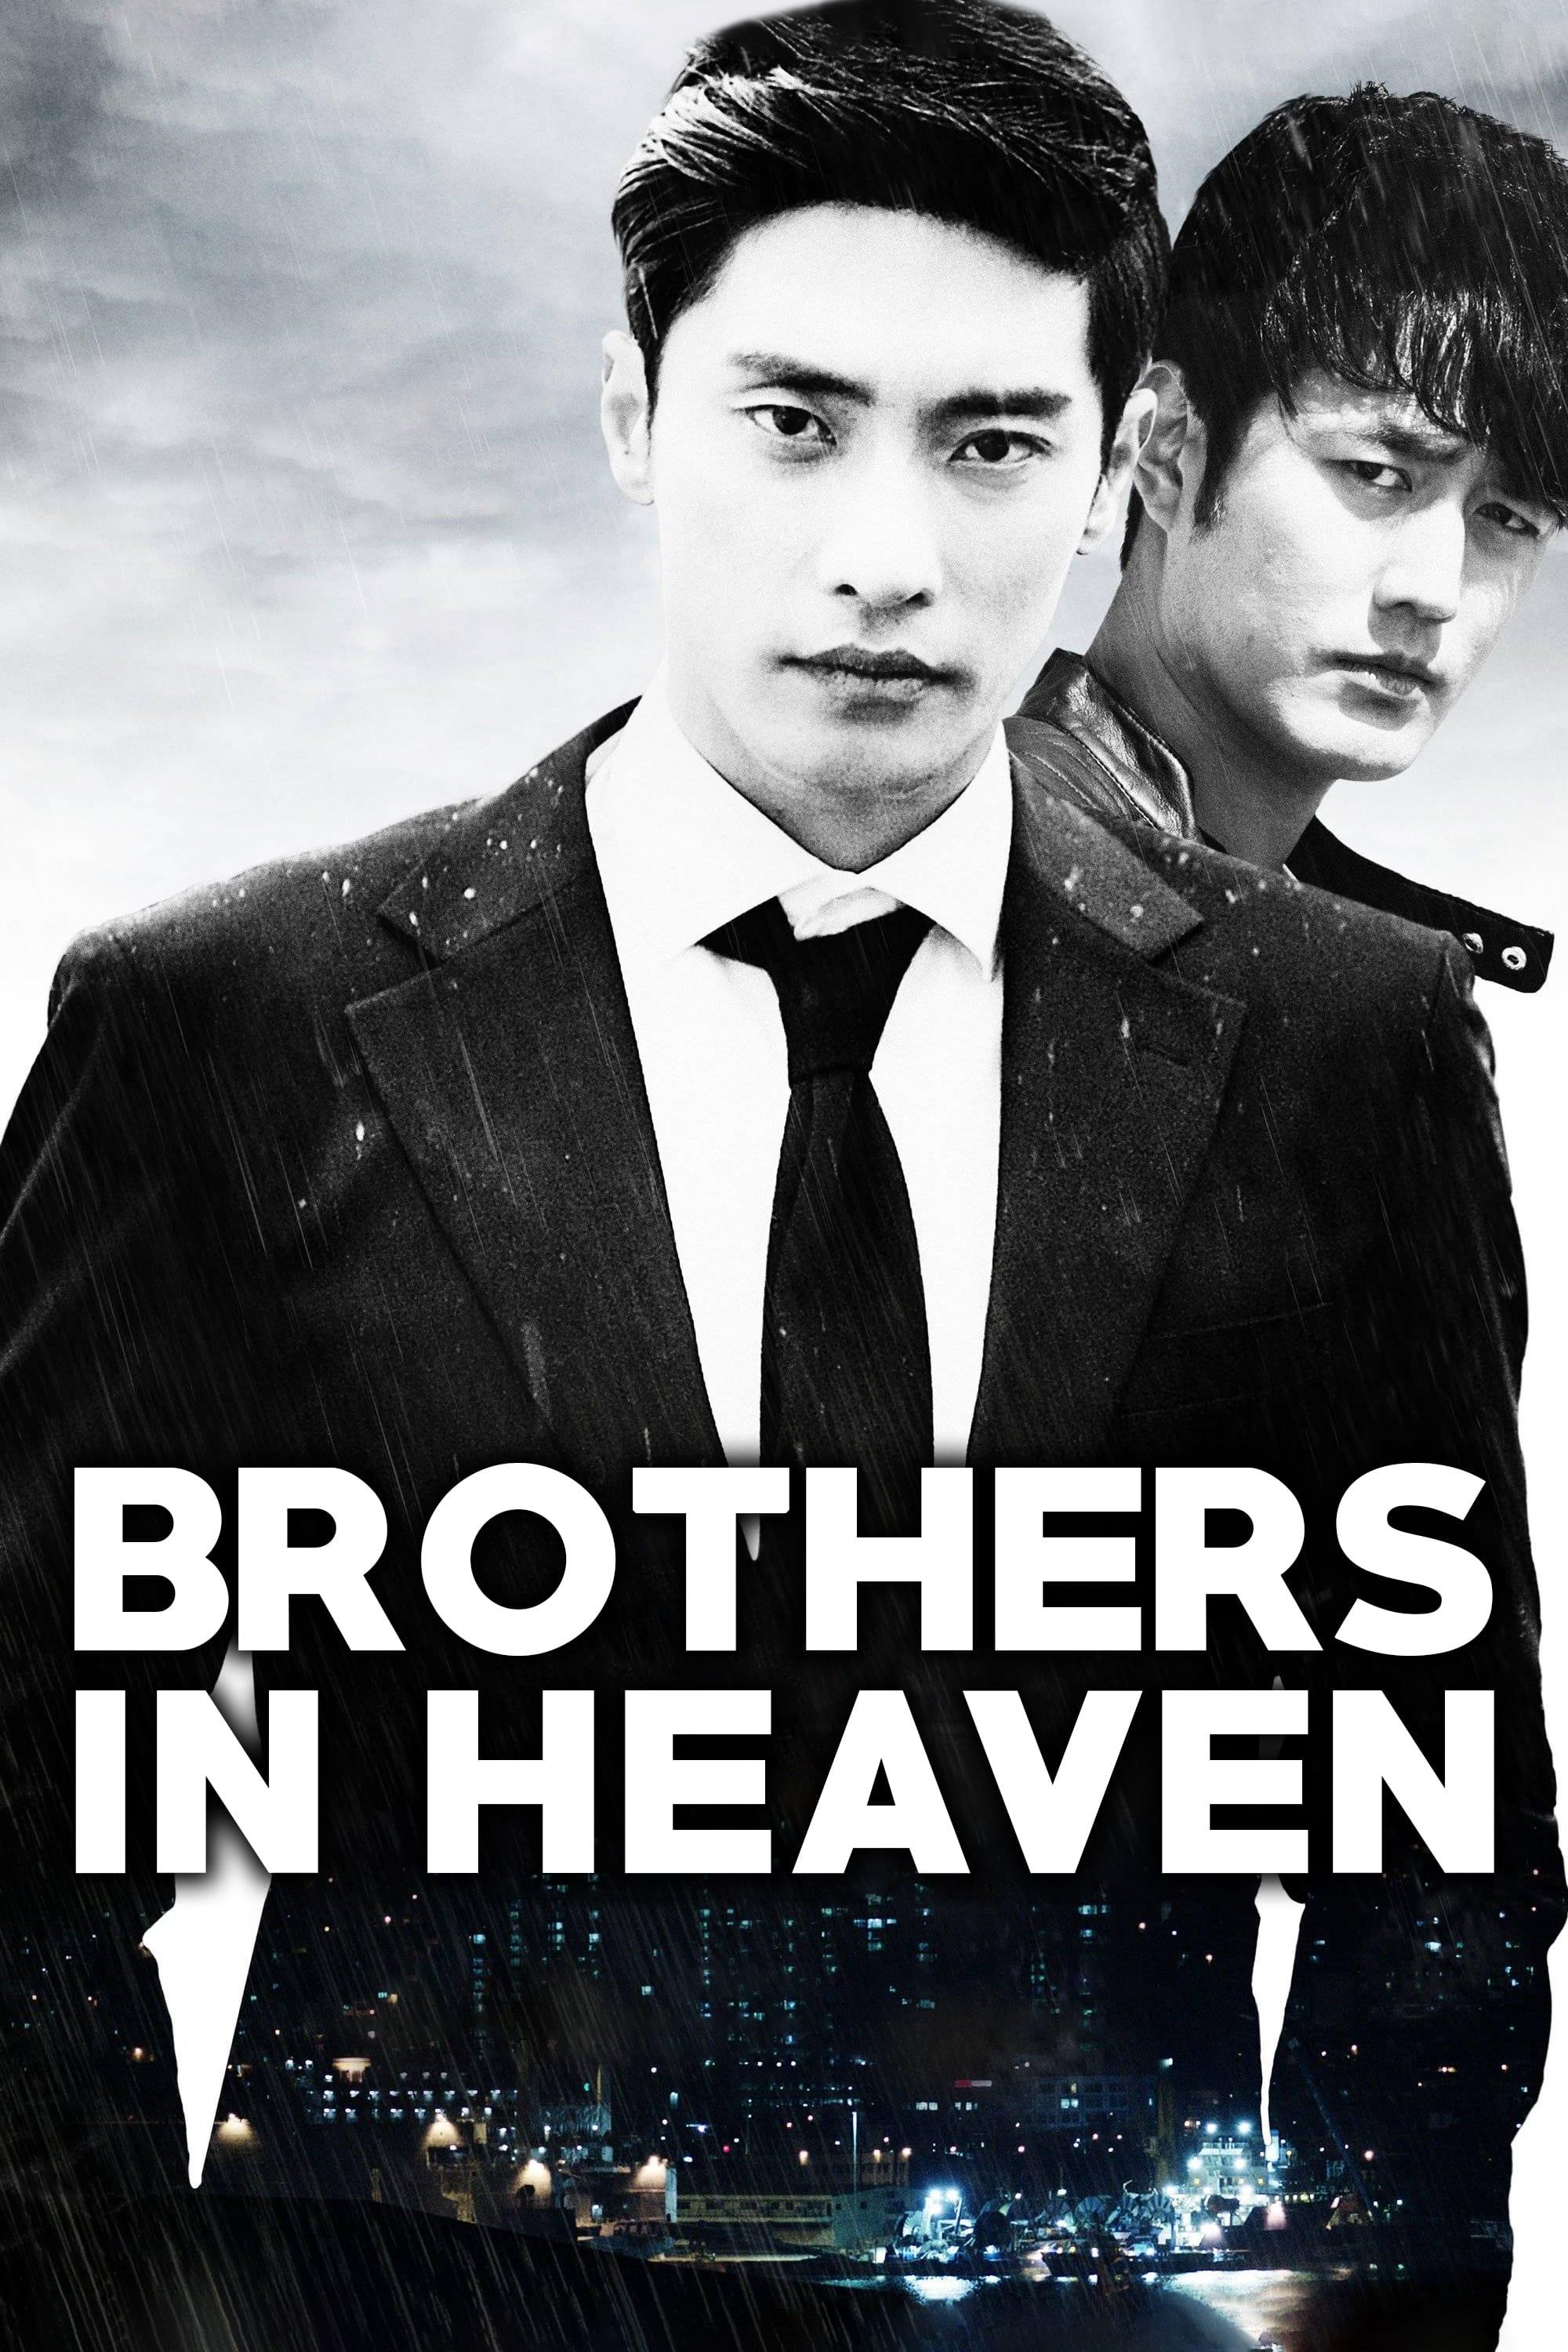 Brothers in Heaven poster